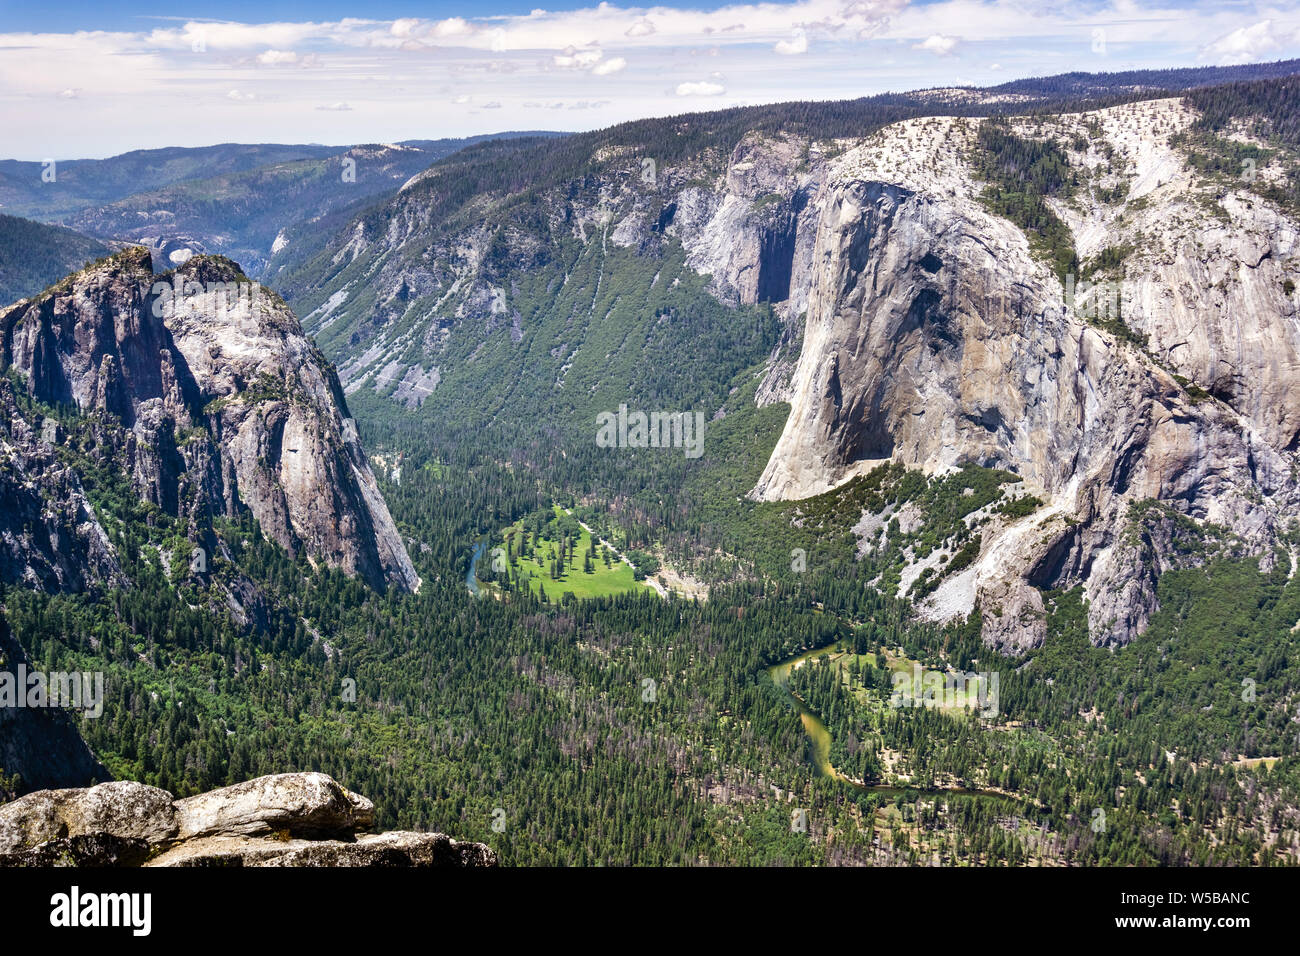 Aerial view of Yosemite Valley, with Merced Rriver flowing through evergreen forests, El Capitan visible on the right; Yosemite National Park, Califor Stock Photo